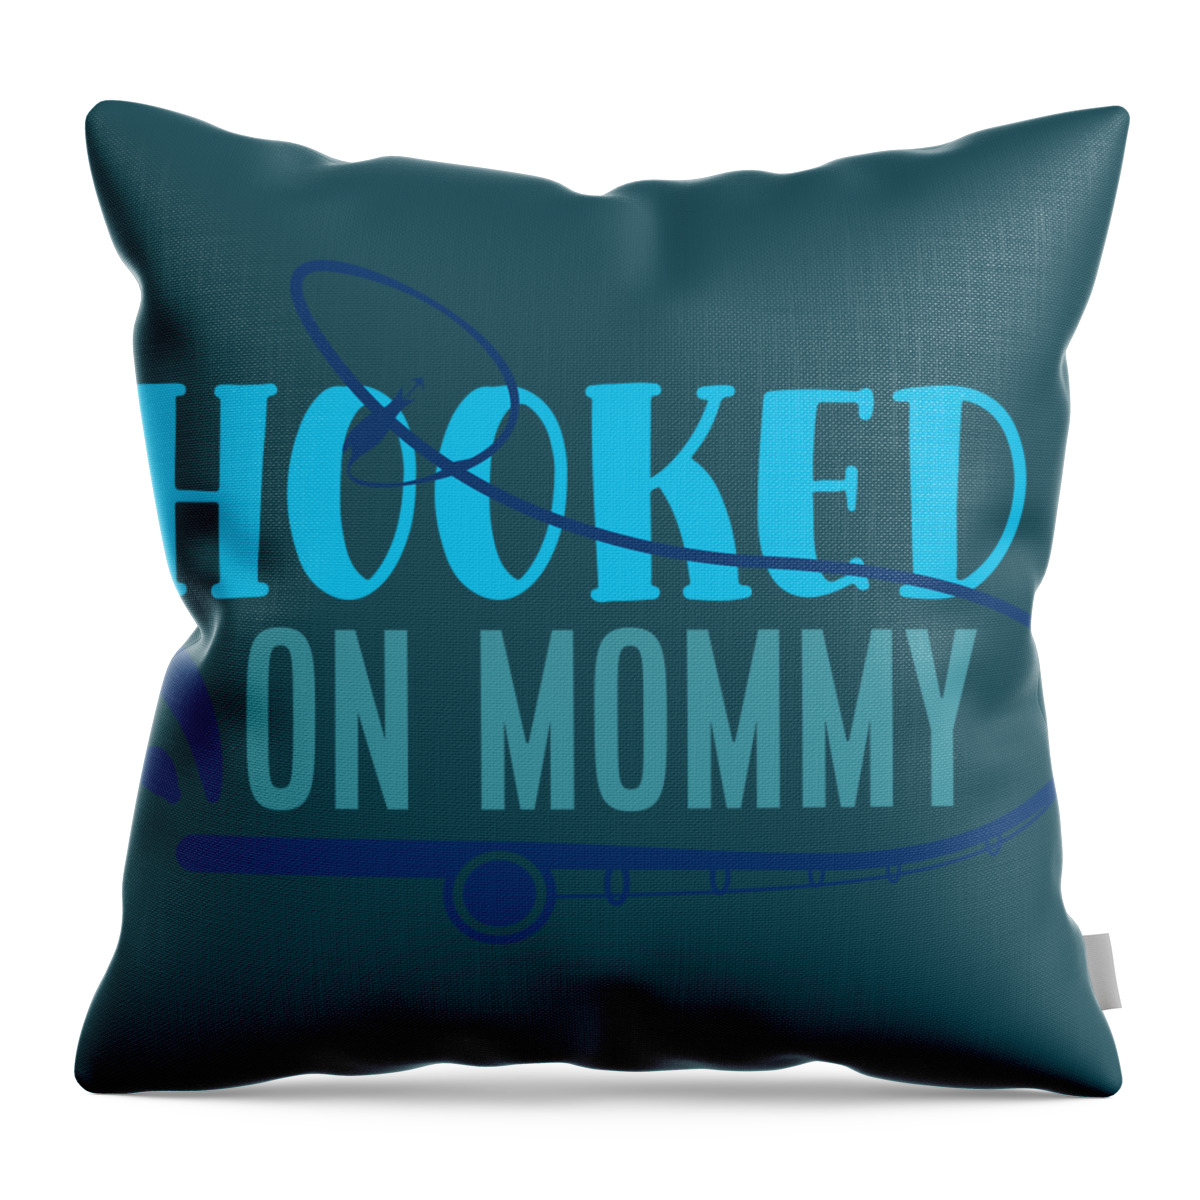 North America Throw Pillow featuring the digital art Hooked On Mommy by Anh Nguyen